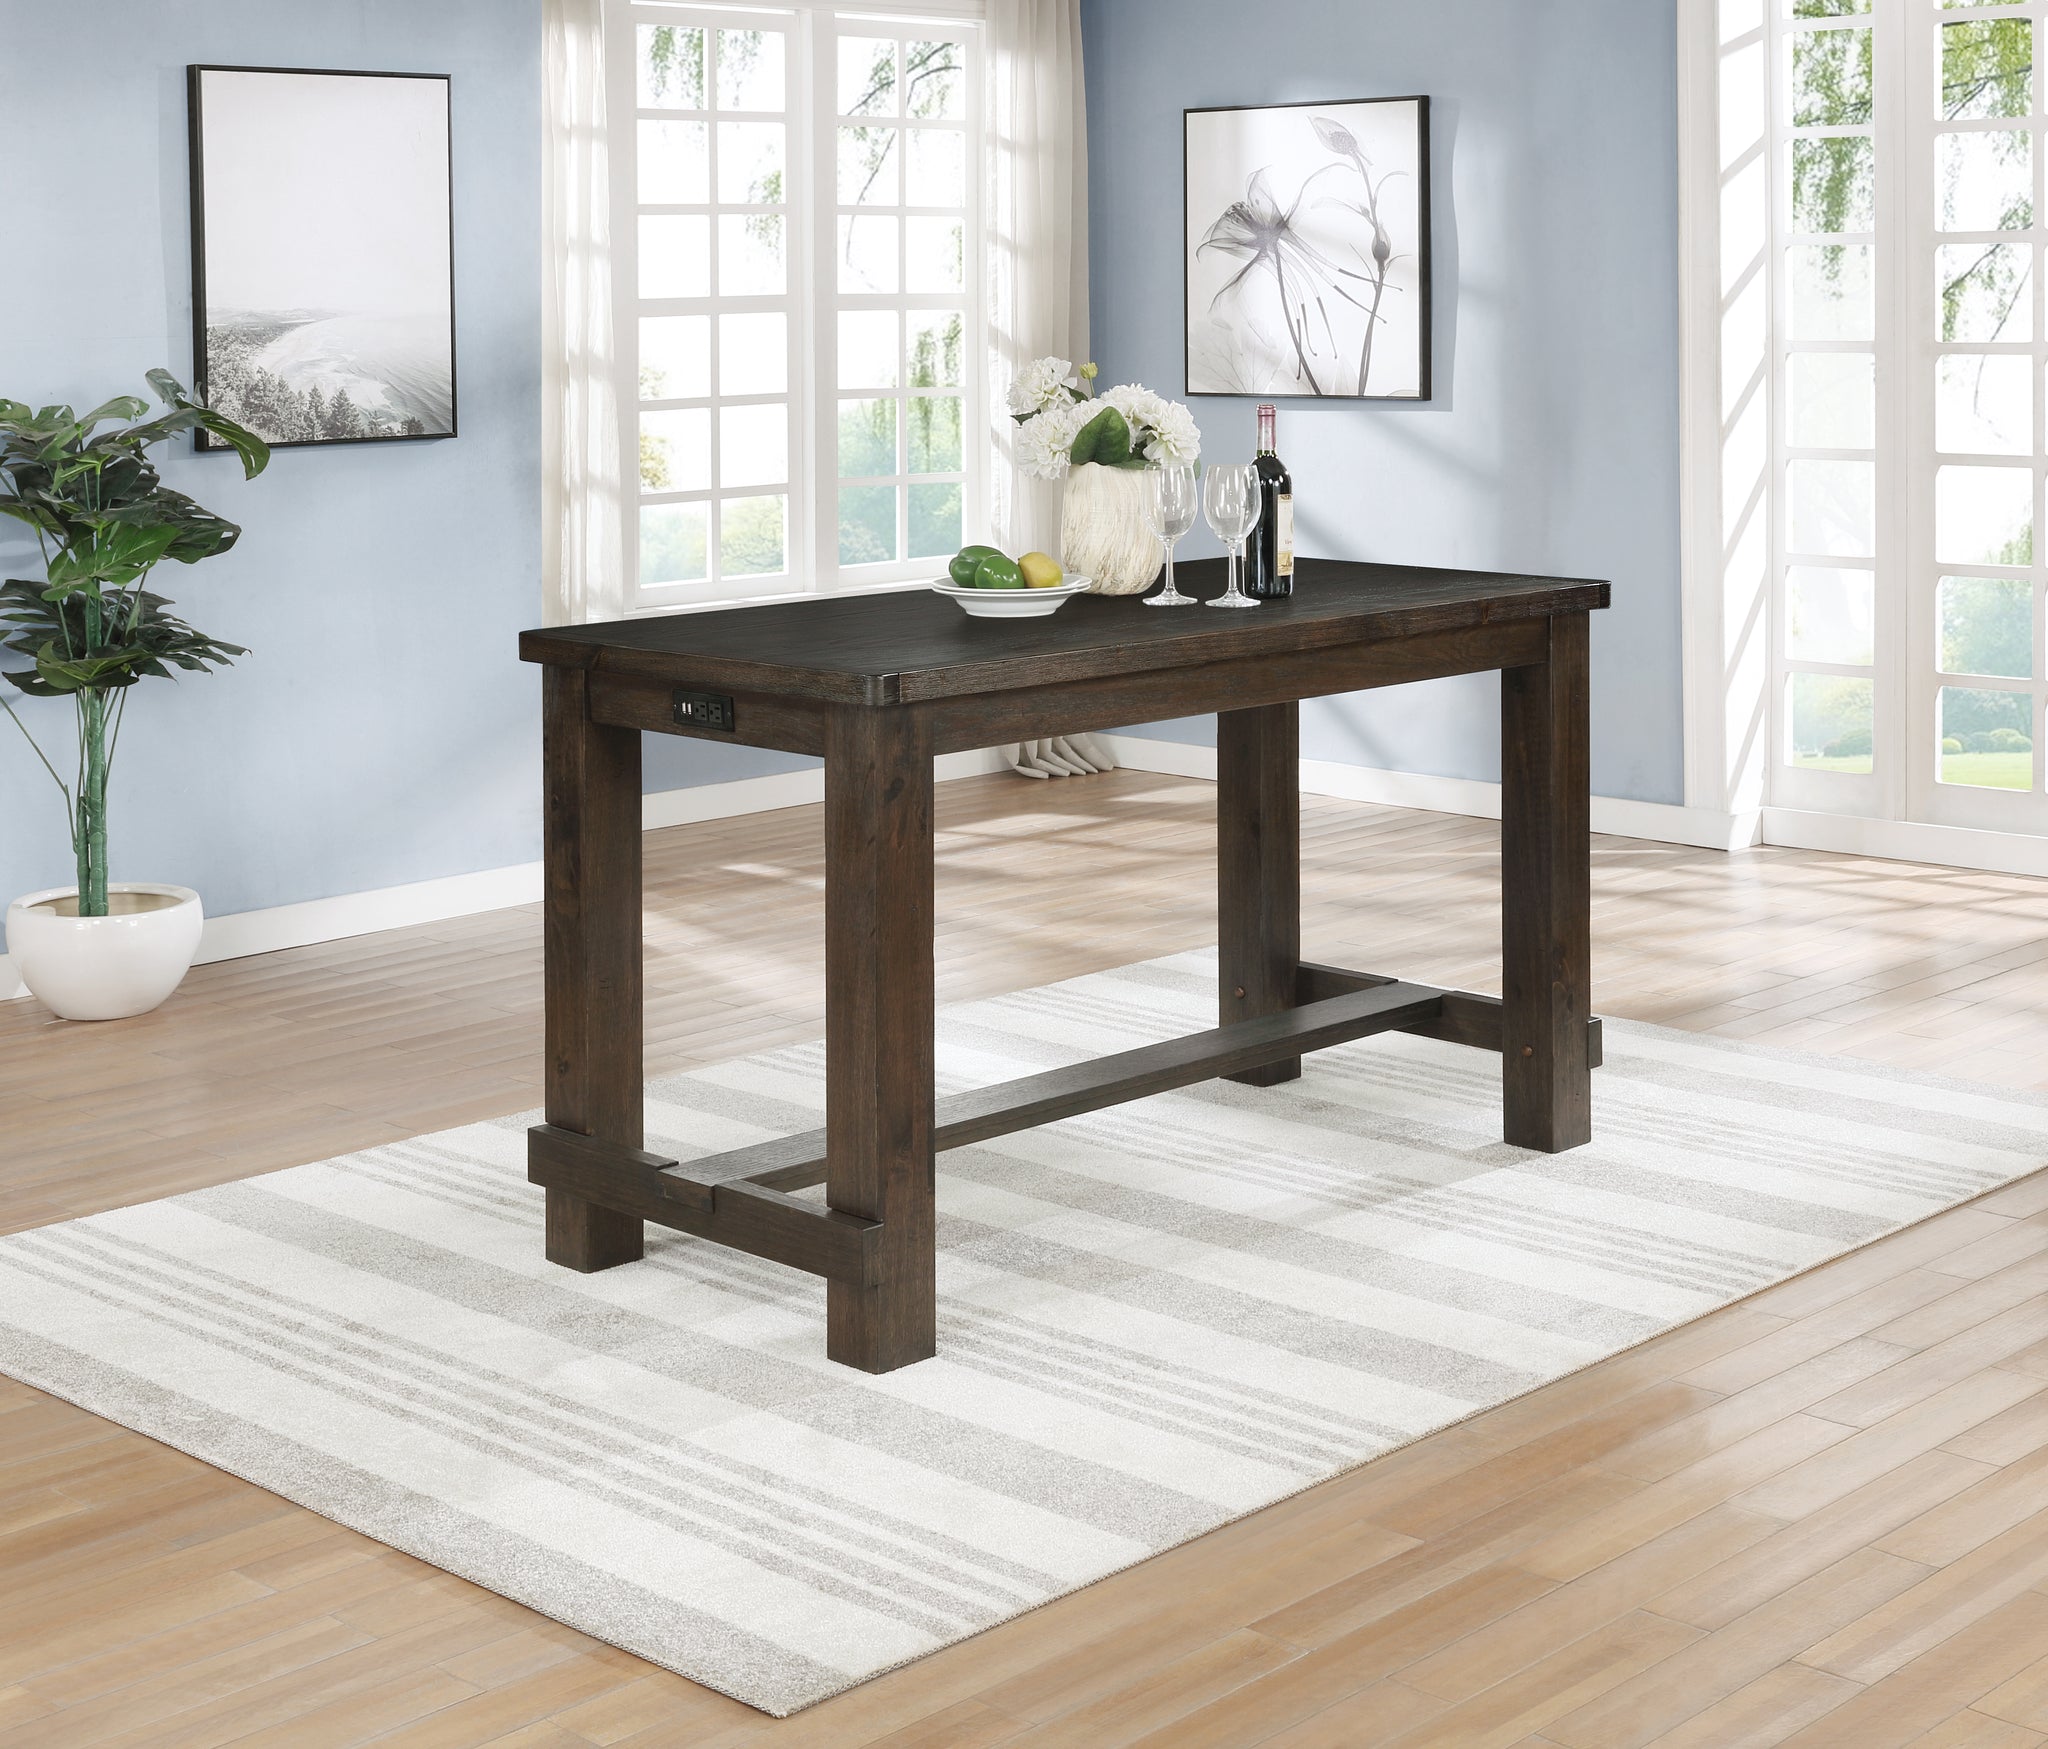 Kessel Brown Brushed Wood Counter Height Dining Table – Roundhill Furniture